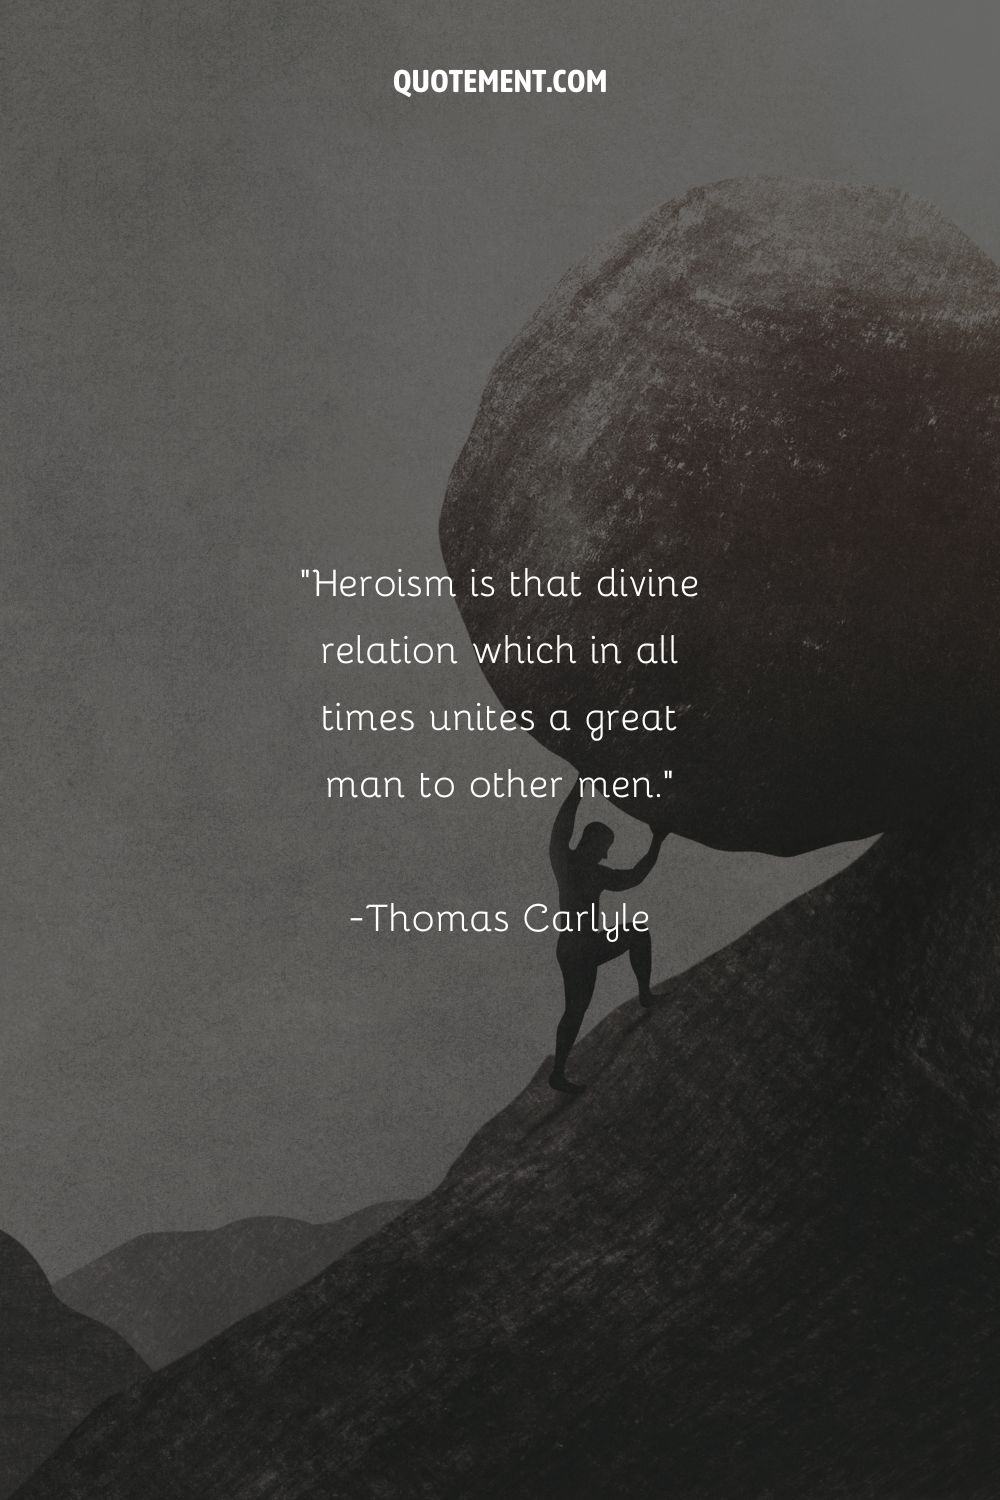 a guy pushing s large stone to the top representing heroism quote